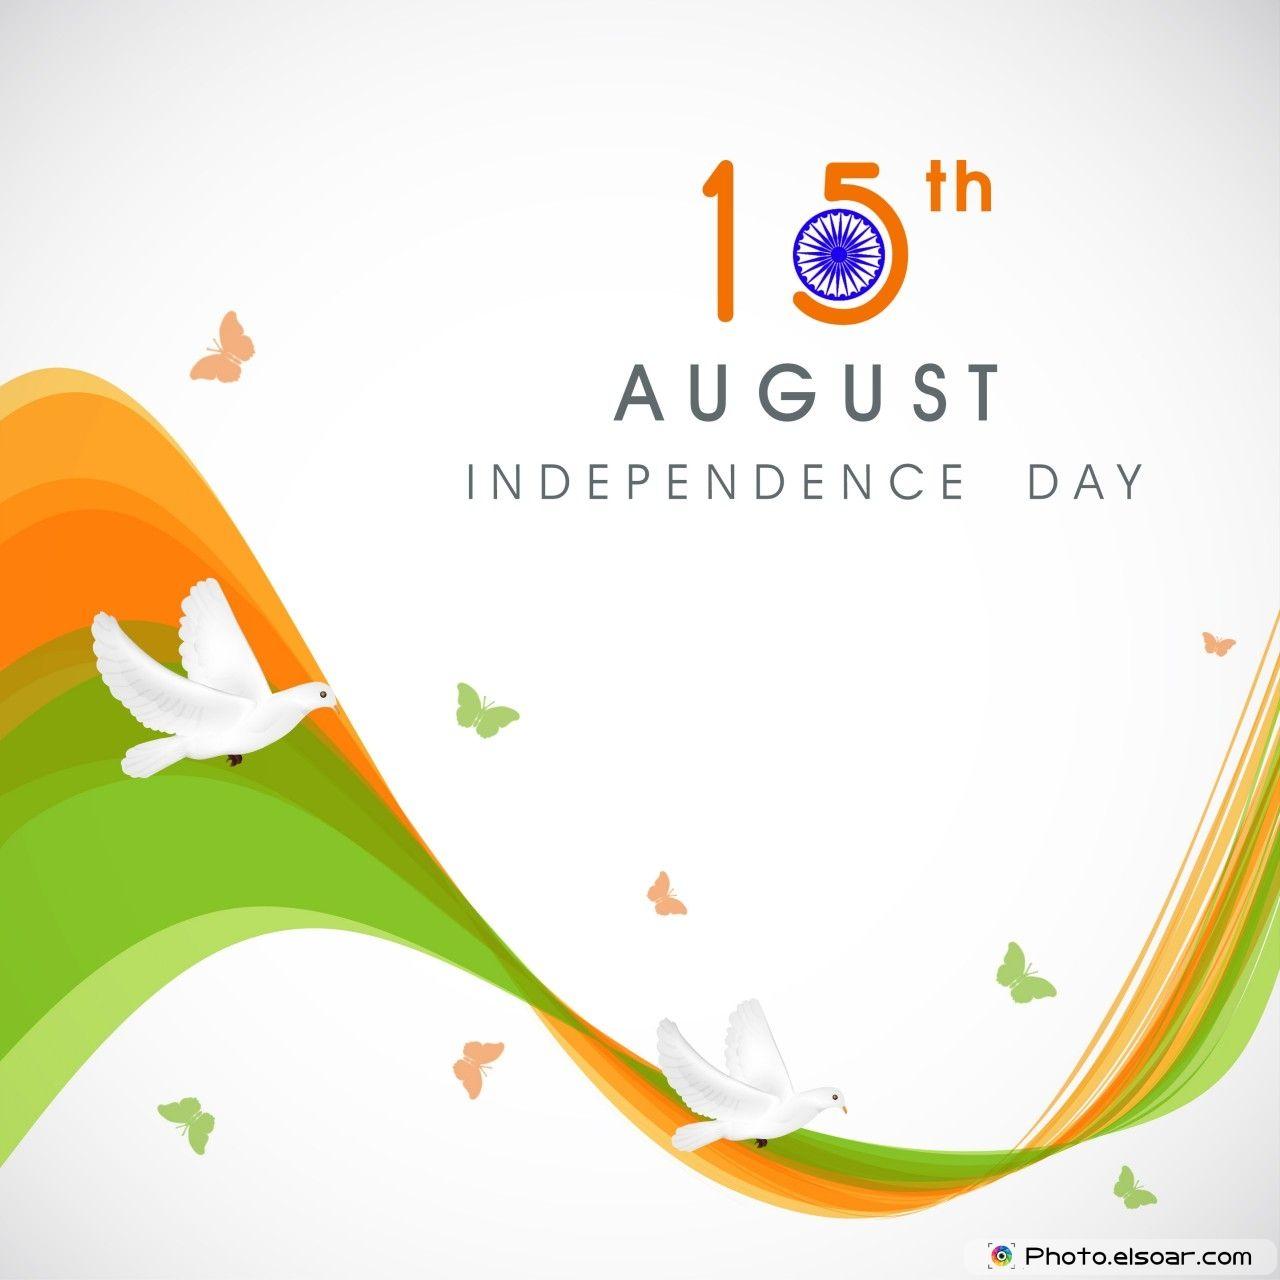 Independence Day of India 15th August Image • Elsoar